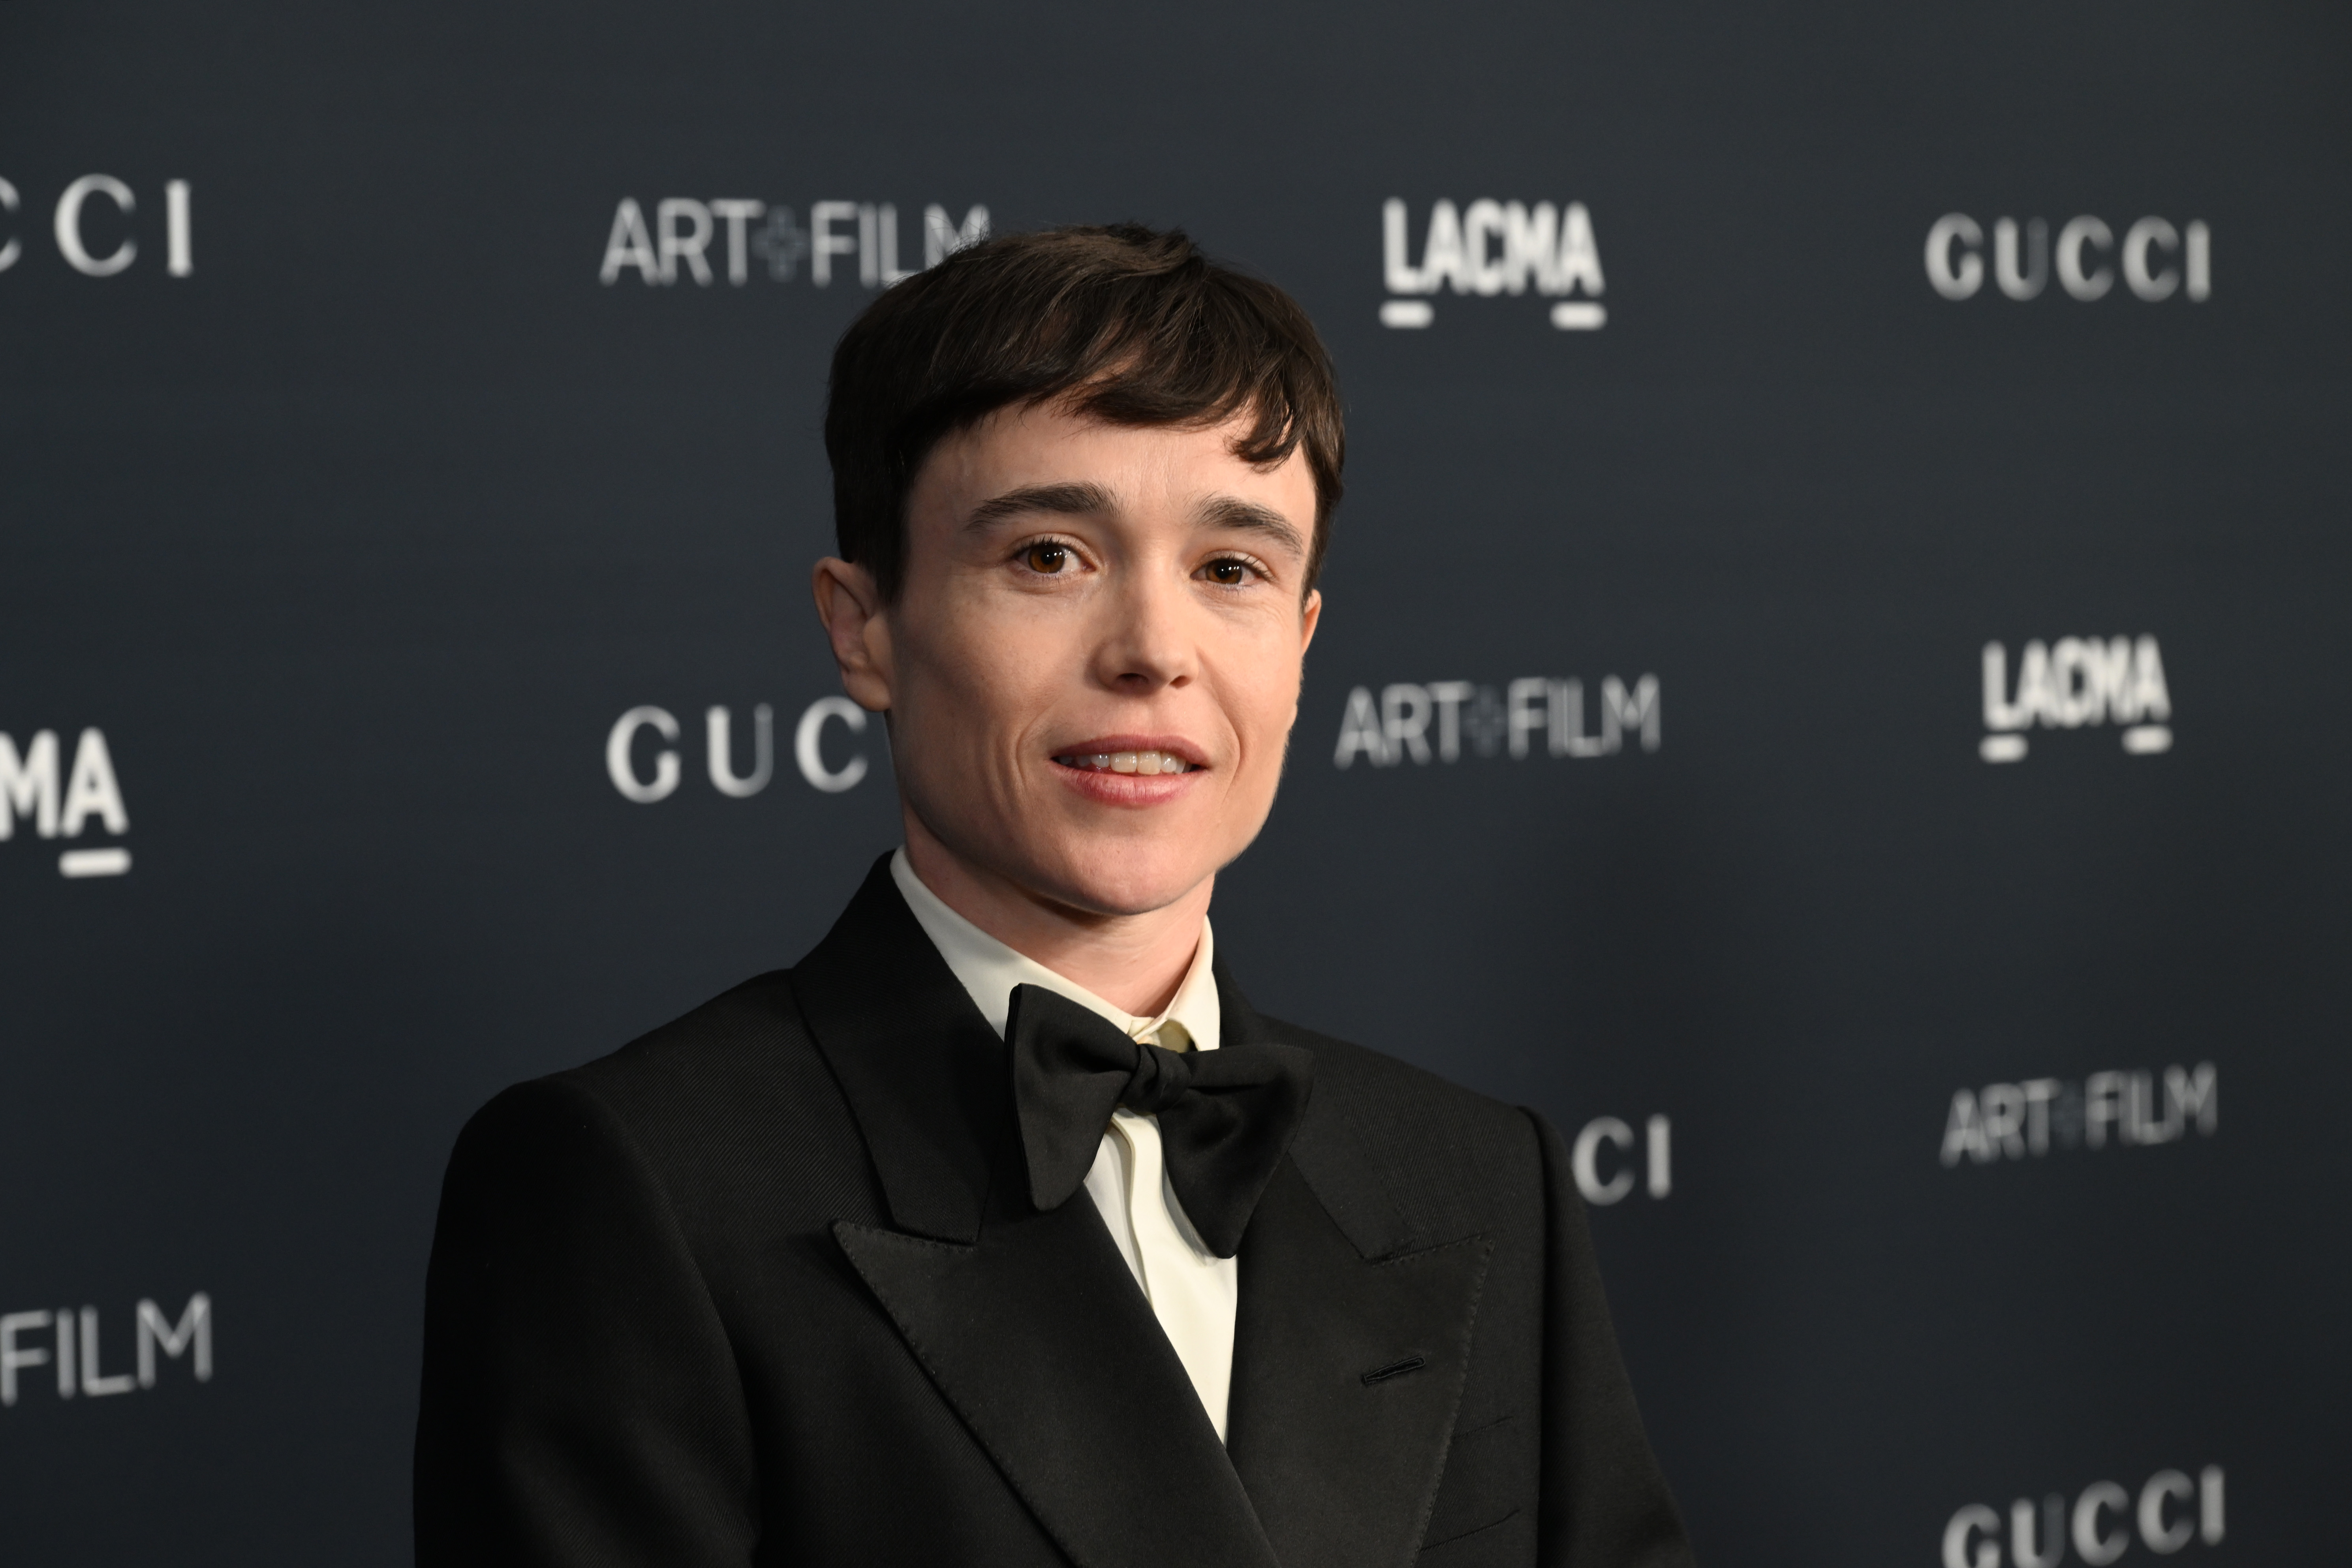 Elliot Page attends the 2022 LACMA ART+FILM Gala Presented By Gucci at the Los Angeles County Museum of Art on November 5, 2022, in Los Angeles, California. | Source: Getty Images